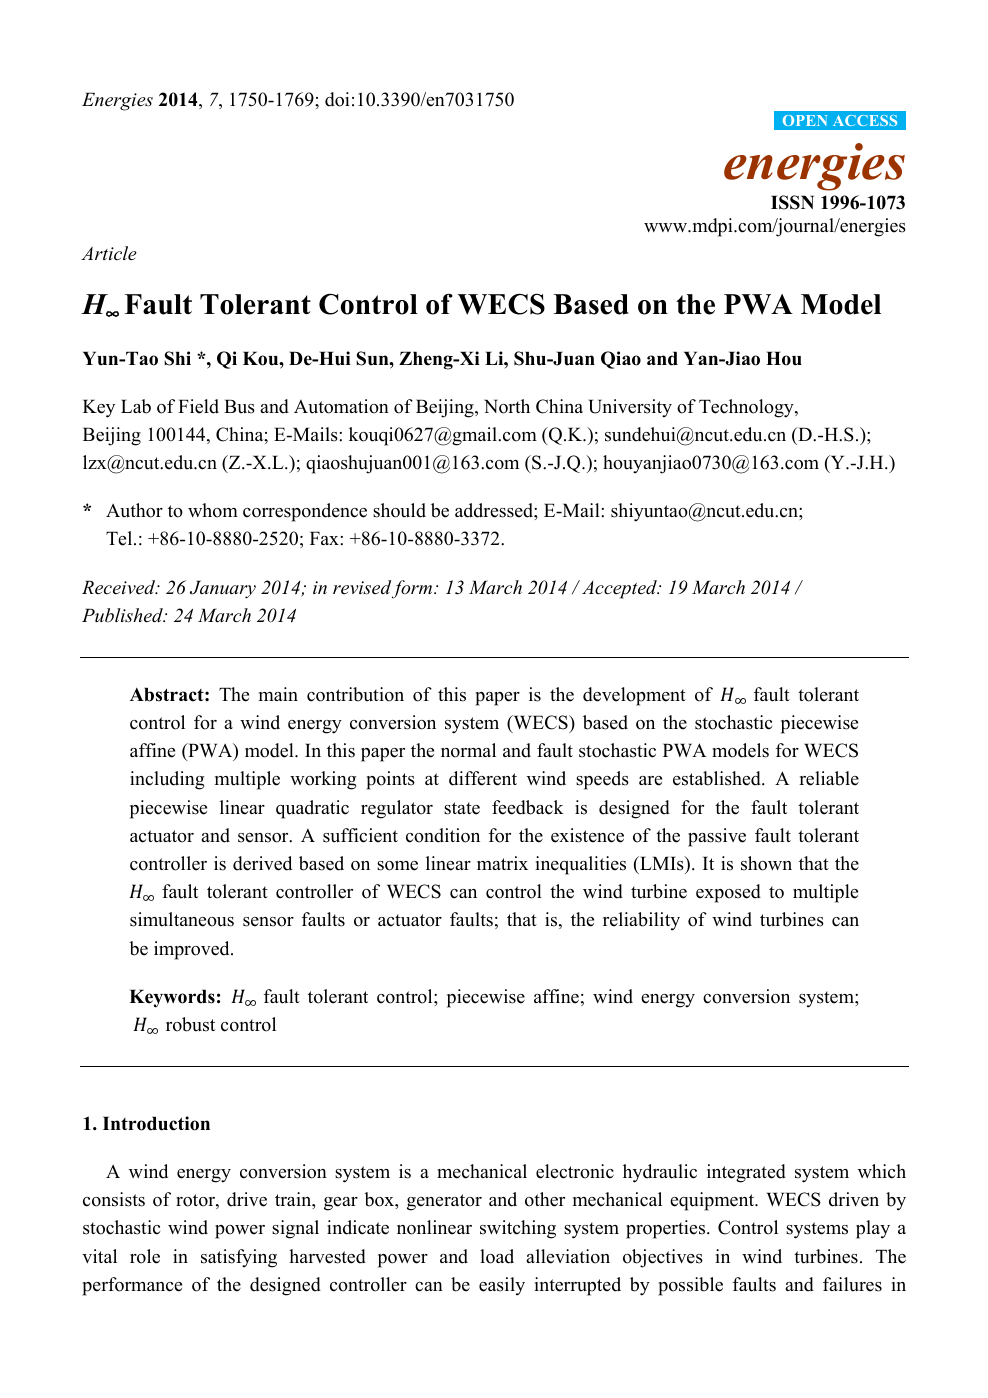 H Fault Tolerant Control Of Wecs Based On The Pwa Model Topic Of Research Paper In Mathematics Download Scholarly Article Pdf And Read For Free On Cyberleninka Open Science Hub